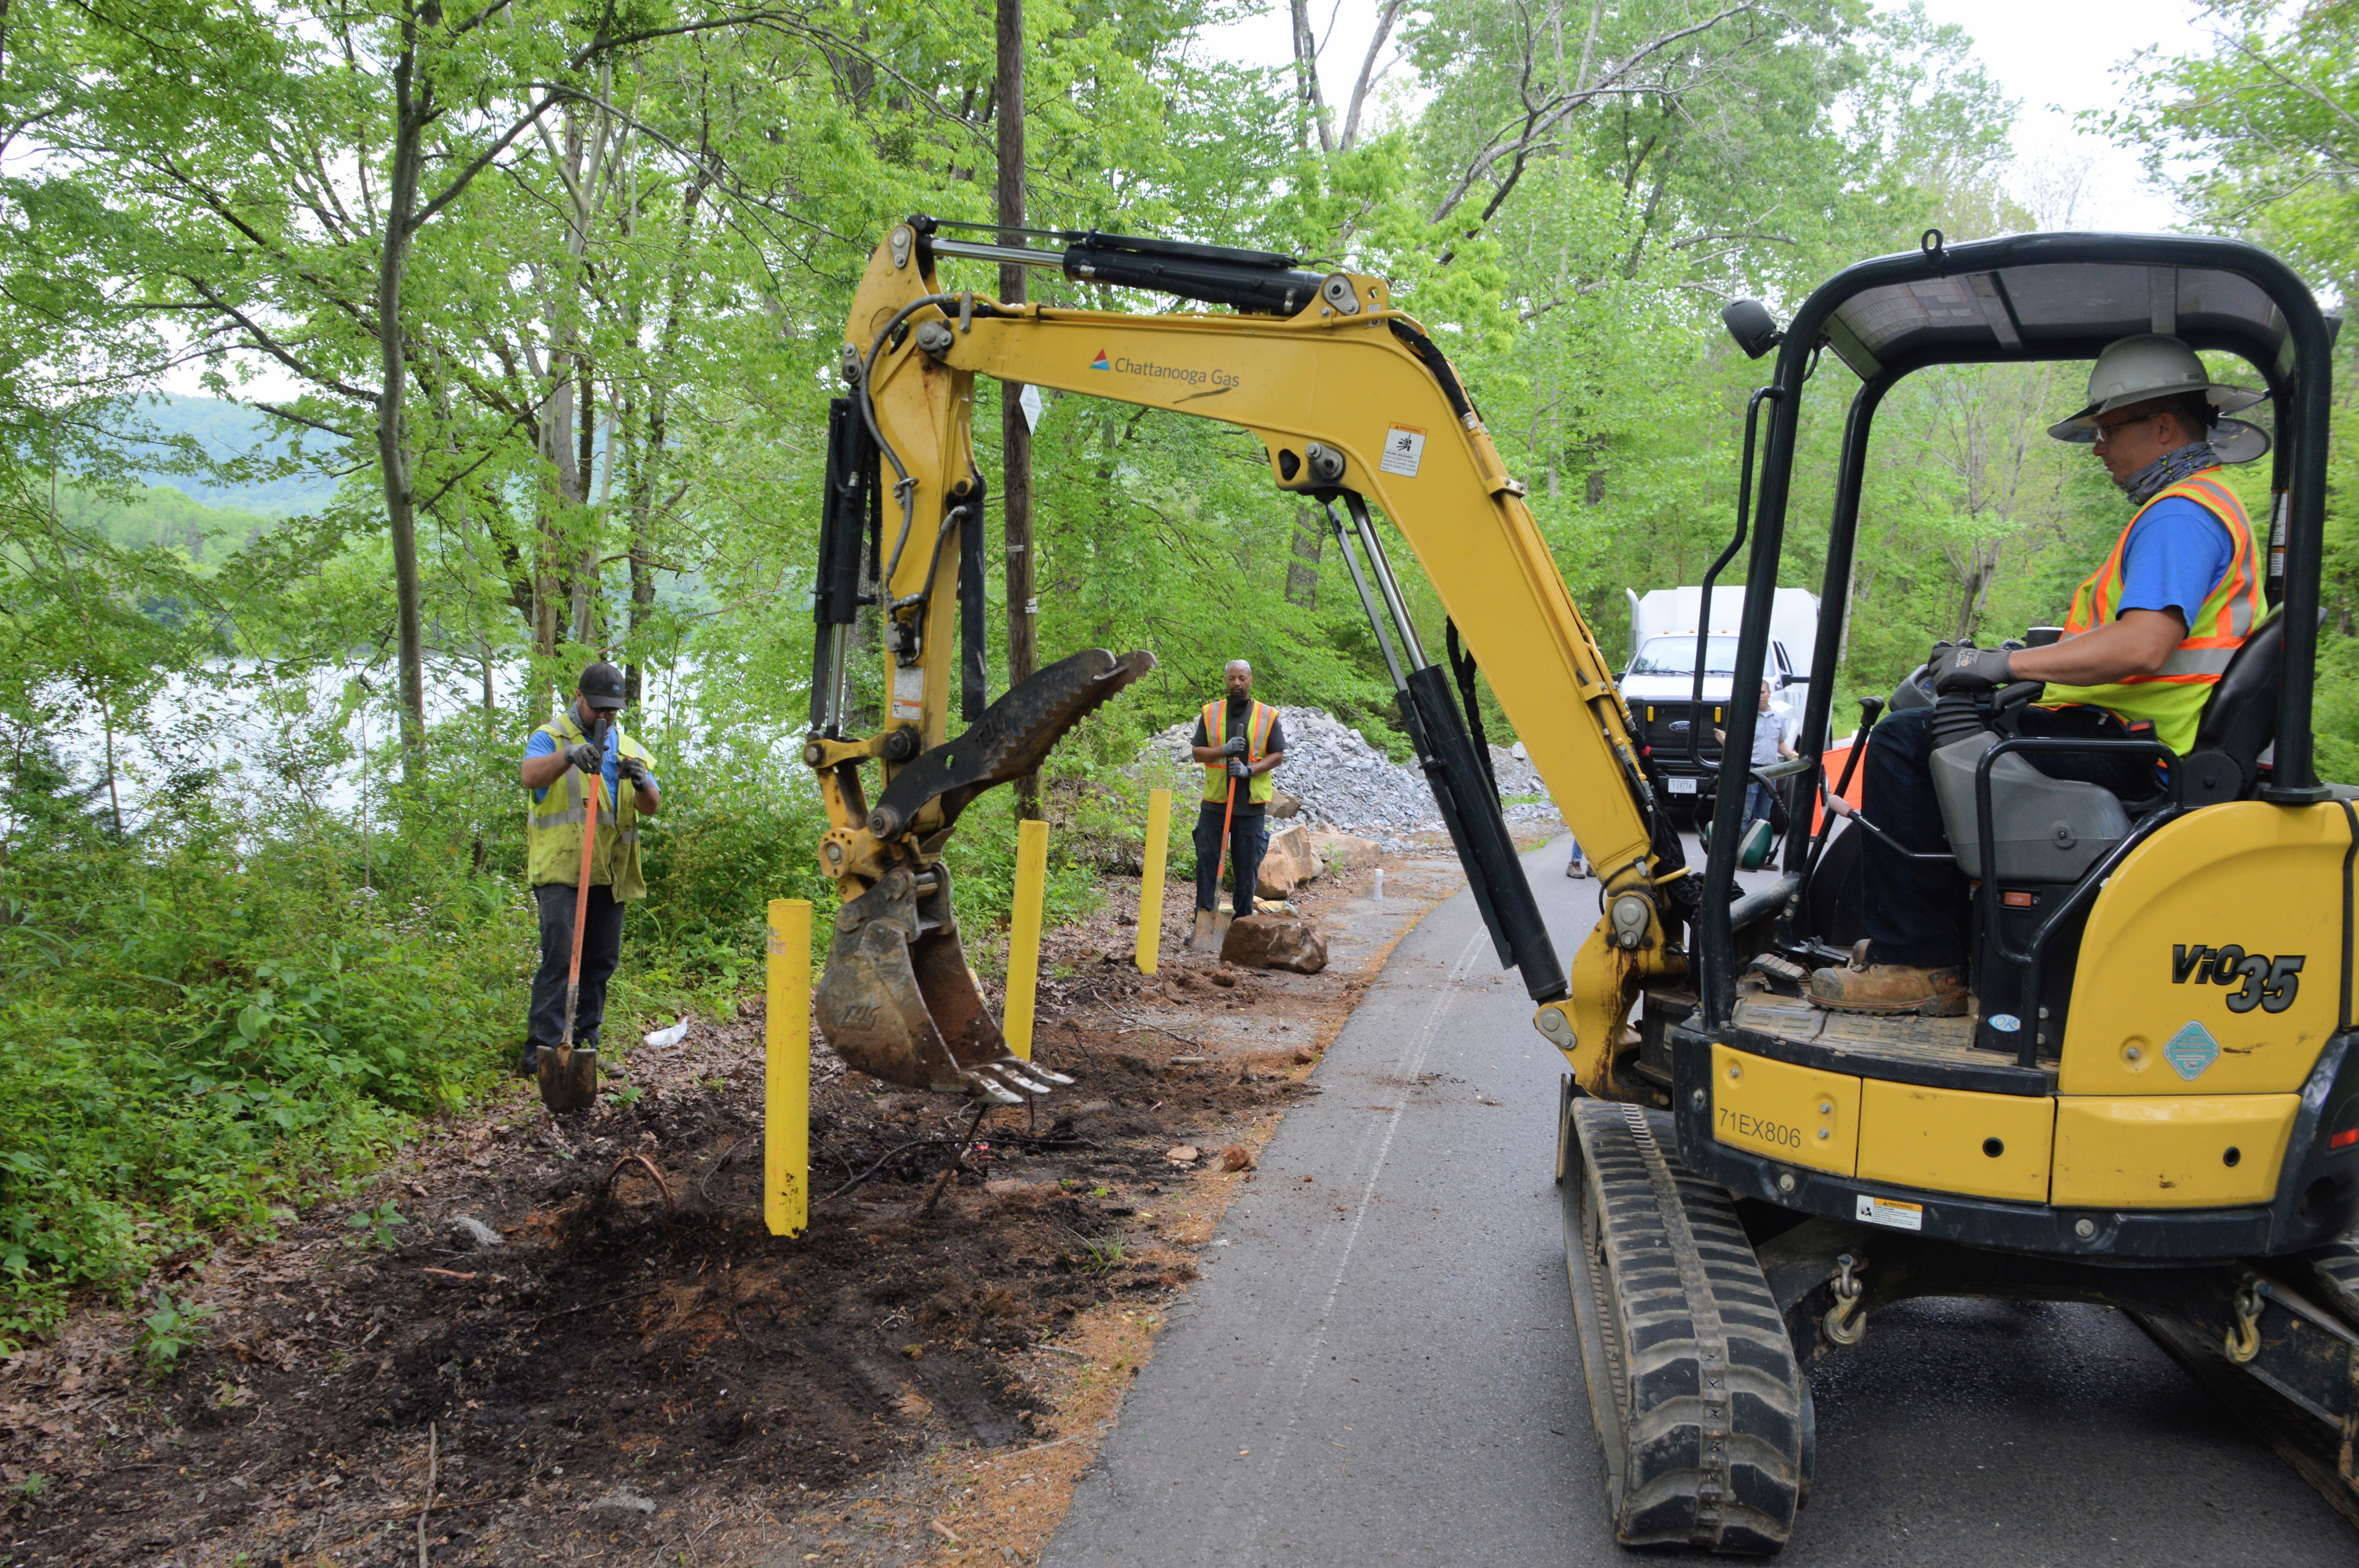 Chattanooga Gas brings volunteers, equipment to help preserve a healthy Tennessee River Gorge